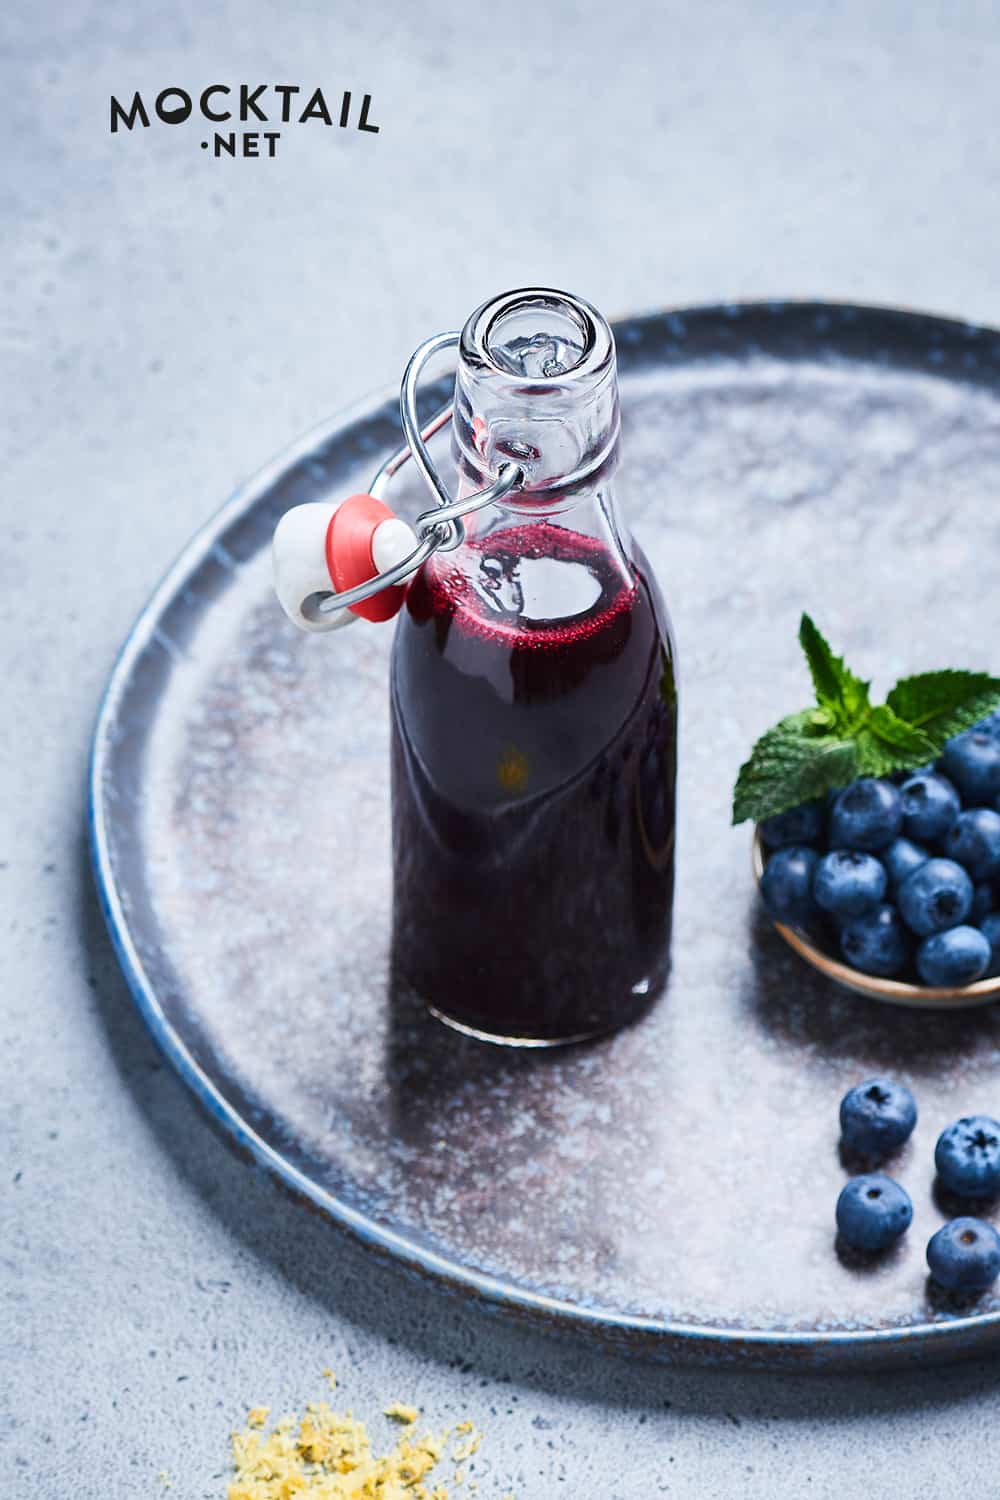 Ingredients for Homemade Blueberry Syrup